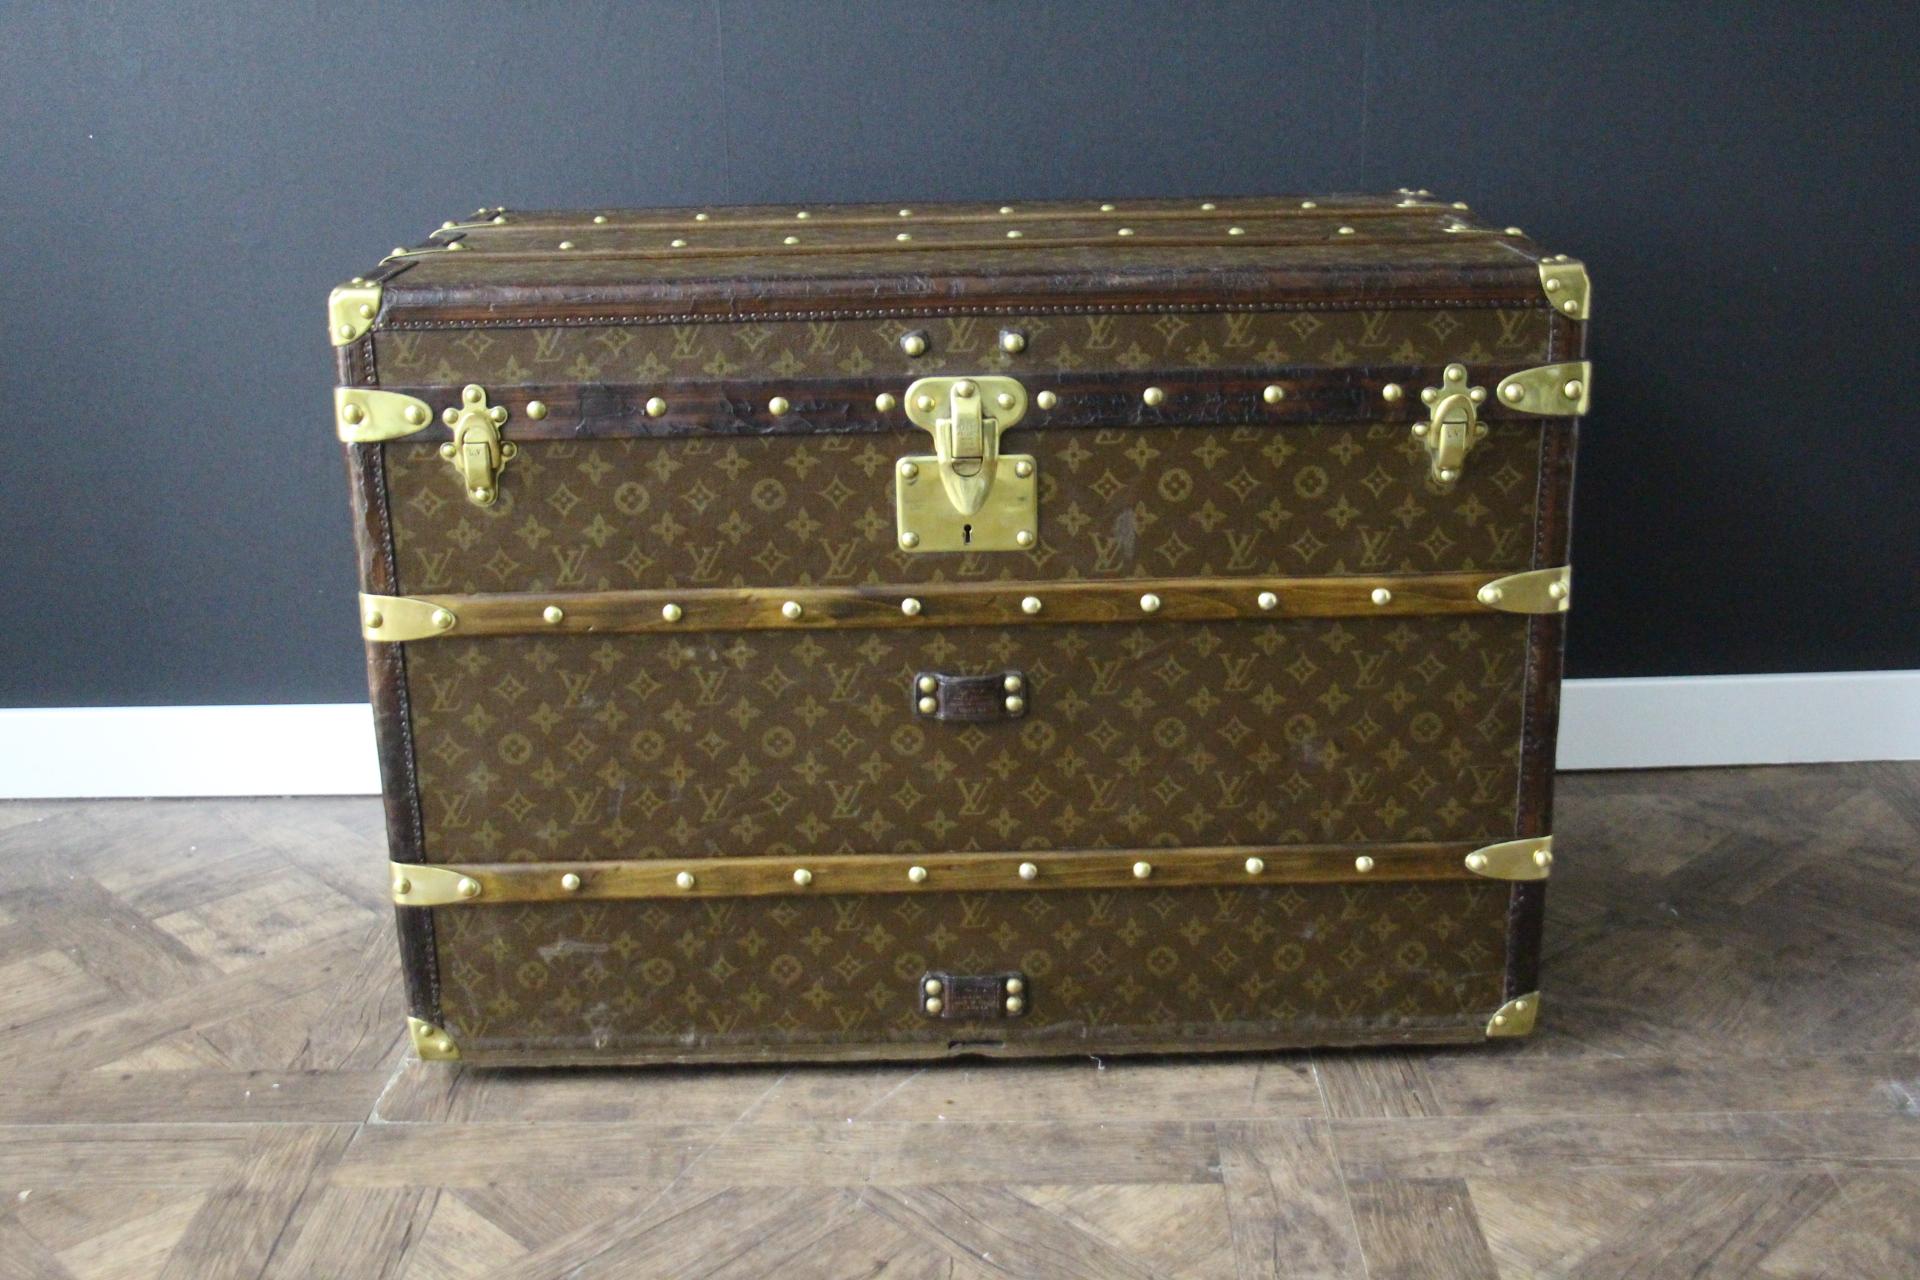 Superb Louis Vuitton steamer trunk featuring stenciled canvas, all leather trim in deep chocolate color, solid brass Louis Vuitton stamped clasps, lock and studs, solid brass corners and solid brass LV stamped side handles. Measure: 76 cm
Customized